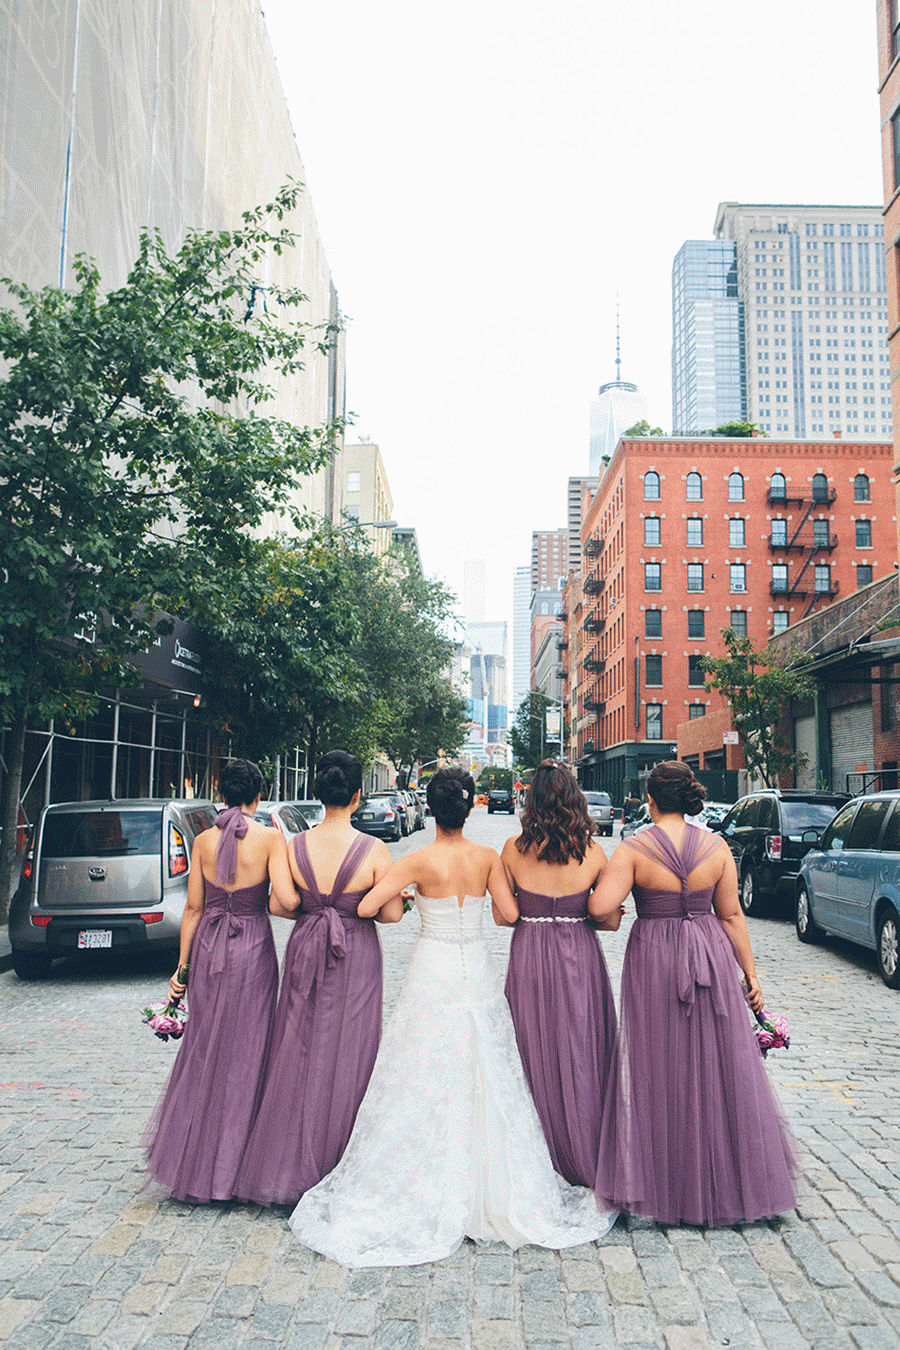 NEW-YORK-CITY-WEDDING-PHOTOGRAPHER-INTIMATE-TRIBECA-ROOFTOP-WEDDING-CENTRAL-PARK-BETHSEDA-FOUNTAIN-ELOPEMENT-NOHO-MUSKETROOM-BROOKLYN-CITYHALL-MANHATTAN-BROOKLYN-WEDDING-PHOTOGRAPHY-BROOKLYN-BRIDGE-PARK-MULTICULTURAL-0020.gif